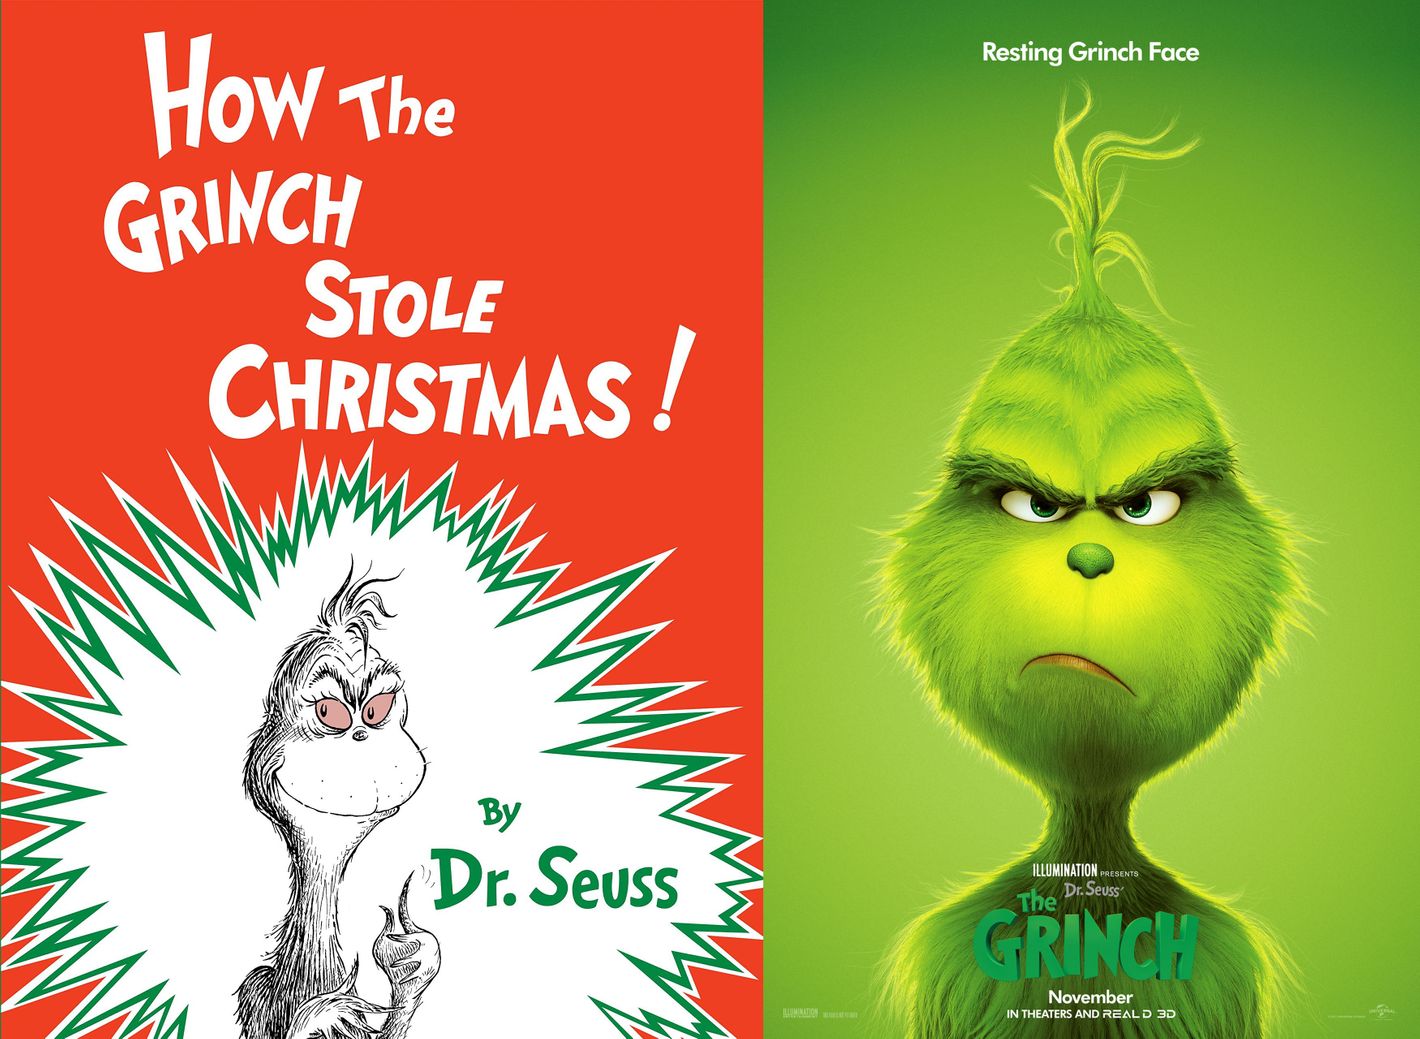 How the Grinch Stole Christmas! by Dr. Seuss. 